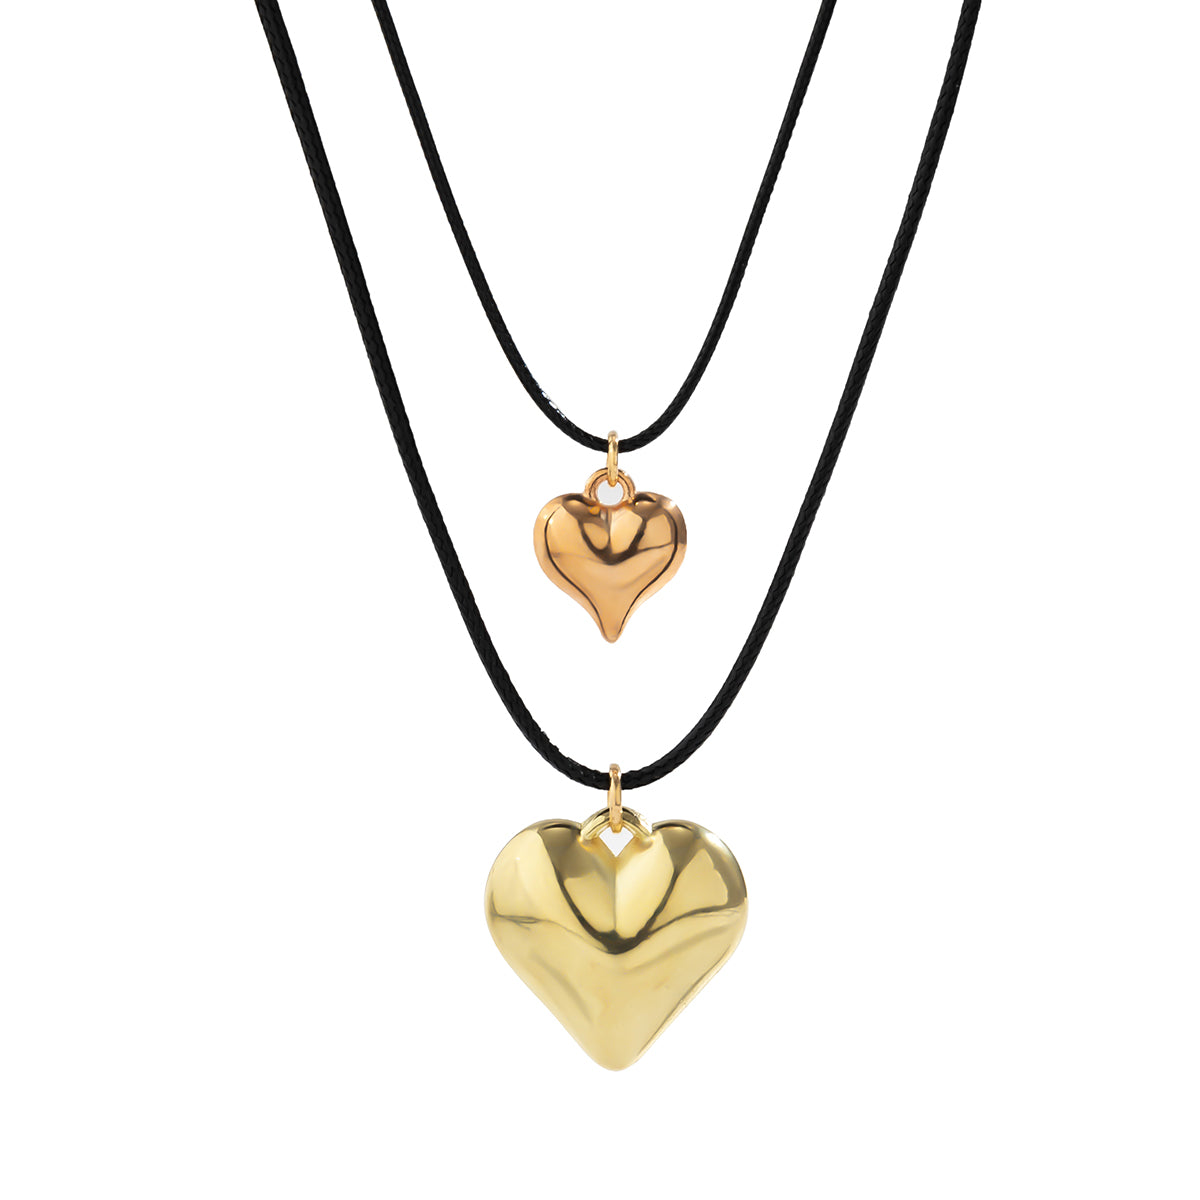 Layered Women's Pendant with leather wax cord and 3D Heart Shape motif by alloy